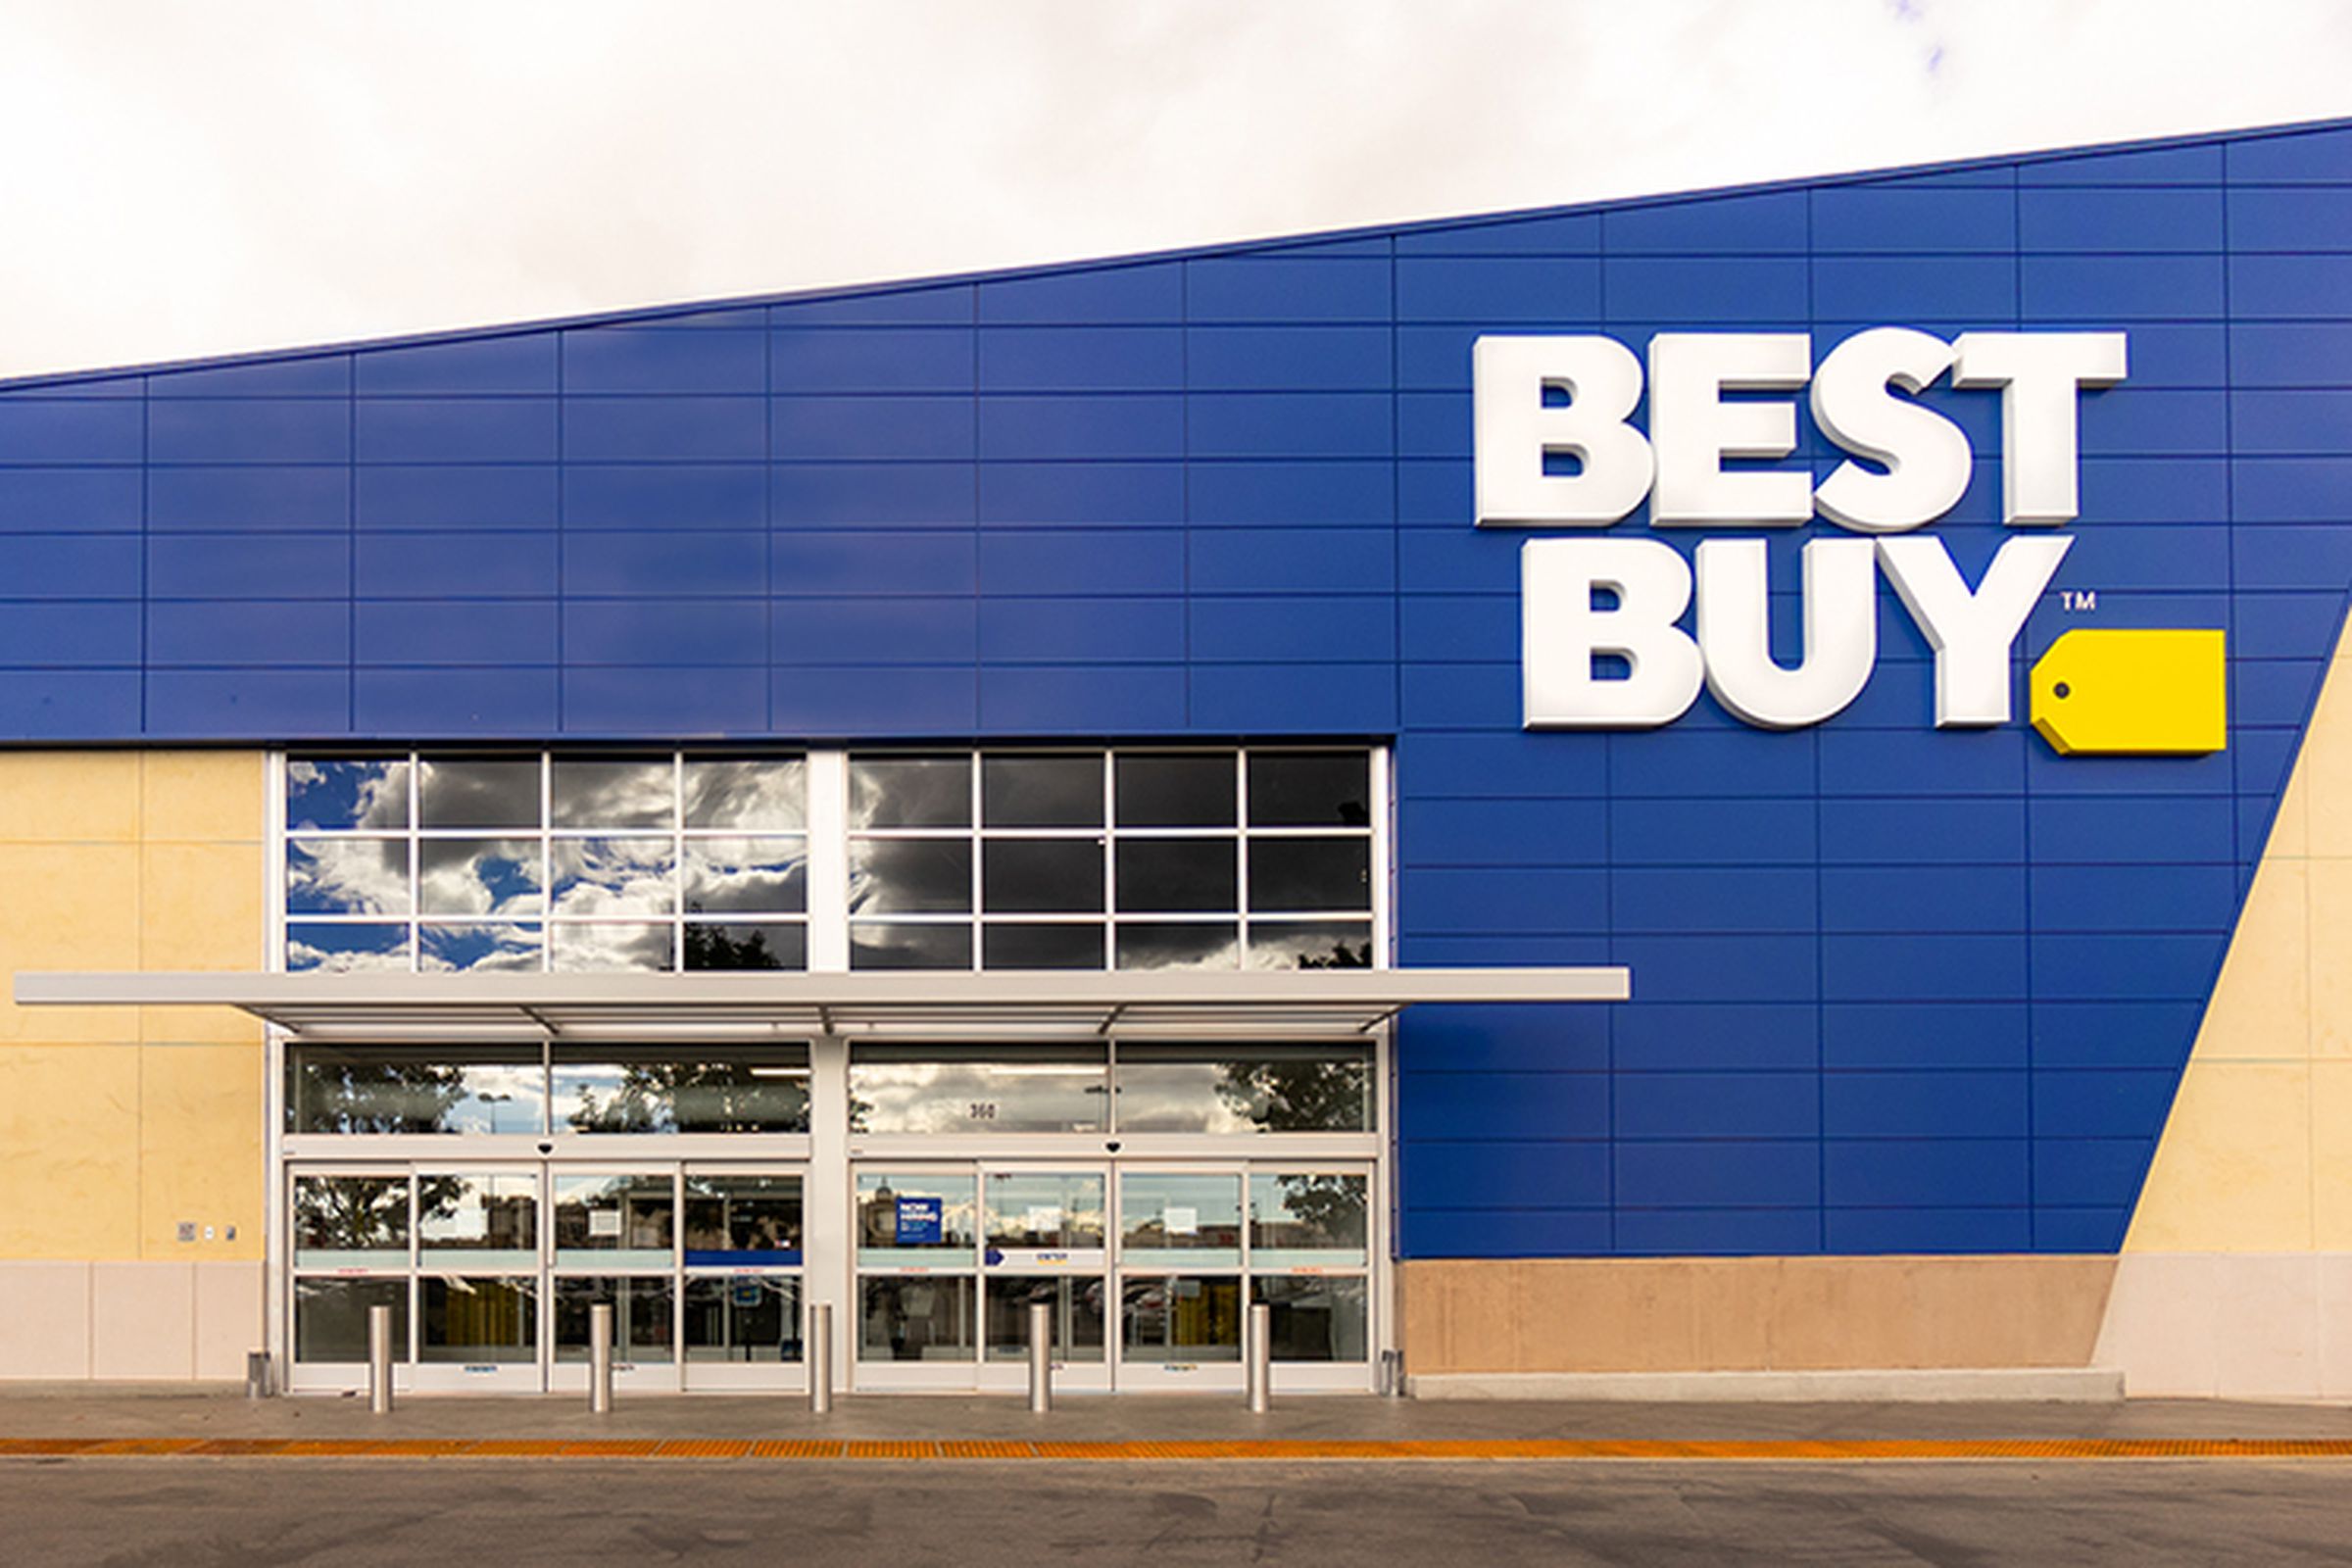 A Best Buy store with a very angular fascia.